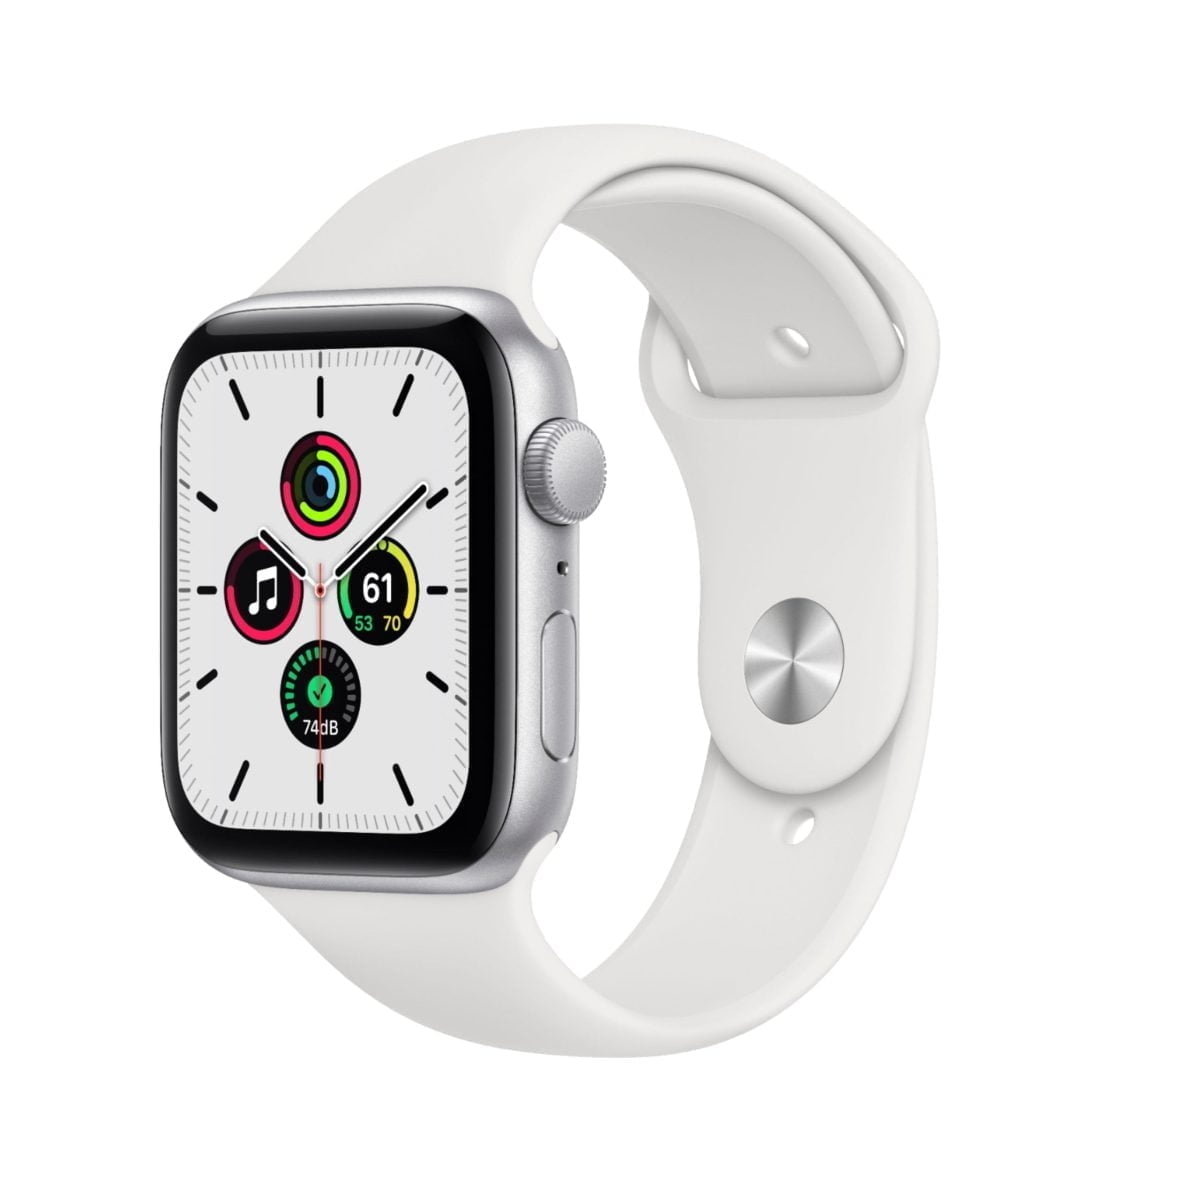 6215919 Sd Scaled Apple &Amp;Lt;H1&Amp;Gt;Apple Watch Se (Gps) 44Mm Silver Aluminum Case With White Sport Band - Silver&Amp;Lt;/H1&Amp;Gt; &Amp;Lt;Div Class=&Amp;Quot;Product-Description&Amp;Quot;&Amp;Gt;Apple Watch Se Has The Same Larger Display Size Retina Display As Series 6, So You Can See More At A Glance. Advanced Sensors To Track All Your Fitness And Workout Goals. And Powerful Features To Keep You Healthy And Safe. The Sleep App Lets You Set A Bedtime Routine And Track Your Sleep. And You Also Get Calls, Messages, And Music Right On Your Wrist. It'S A Lot Of Watch For A Lot Less Than You Expected.&Amp;Lt;/Div&Amp;Gt; Apple Watch Se Apple Watch Se (Gps) 44Mm Silver Aluminum Case With White Sport Band - Silver